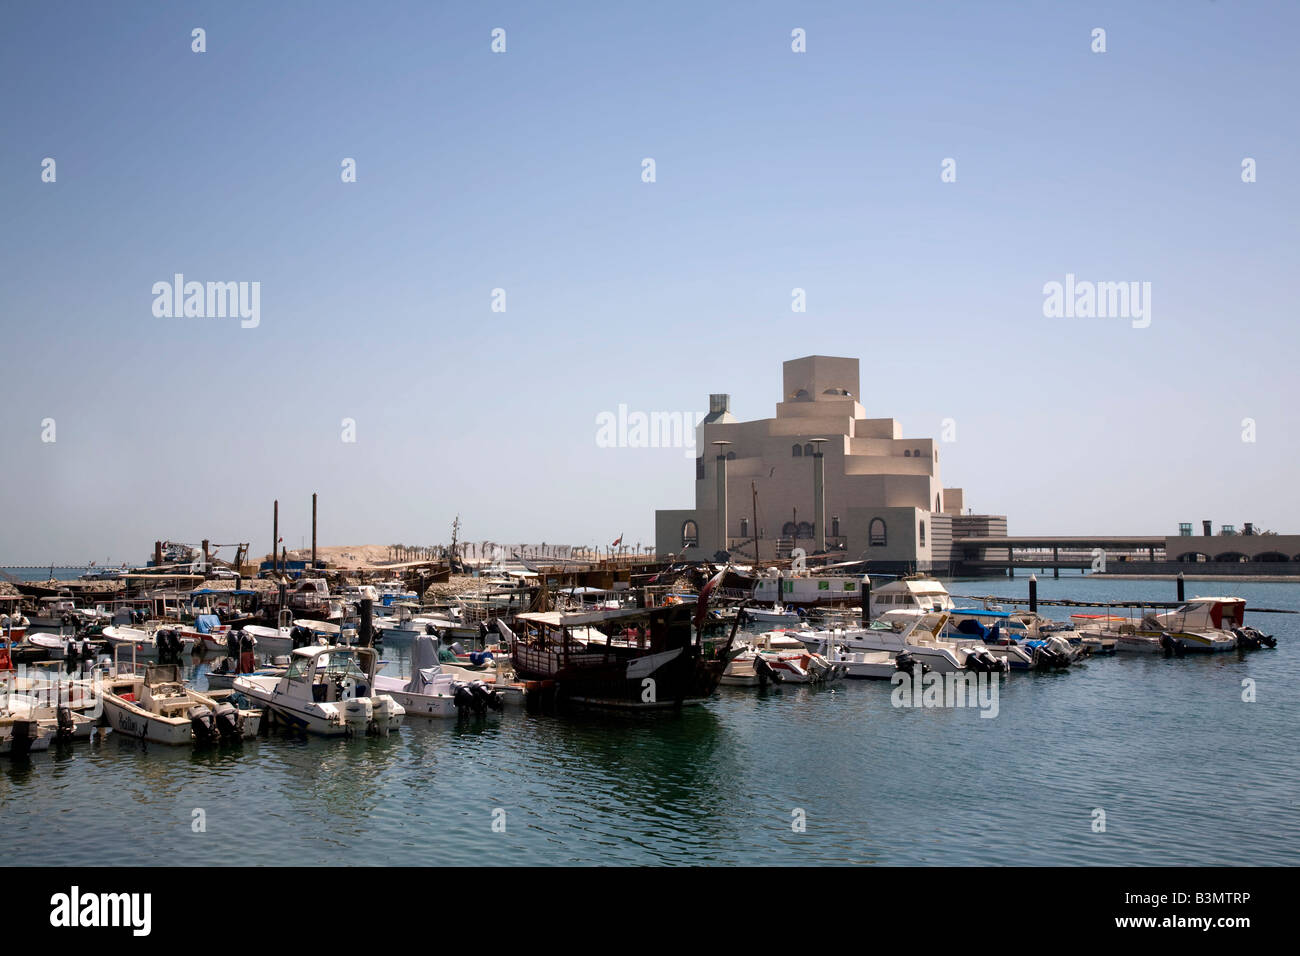 New Museum of Islamic Art in Doha Doha Bay Qatar Middle East Arabian Gulf Skyline with pleasure and fishing boats in foreground Stock Photo